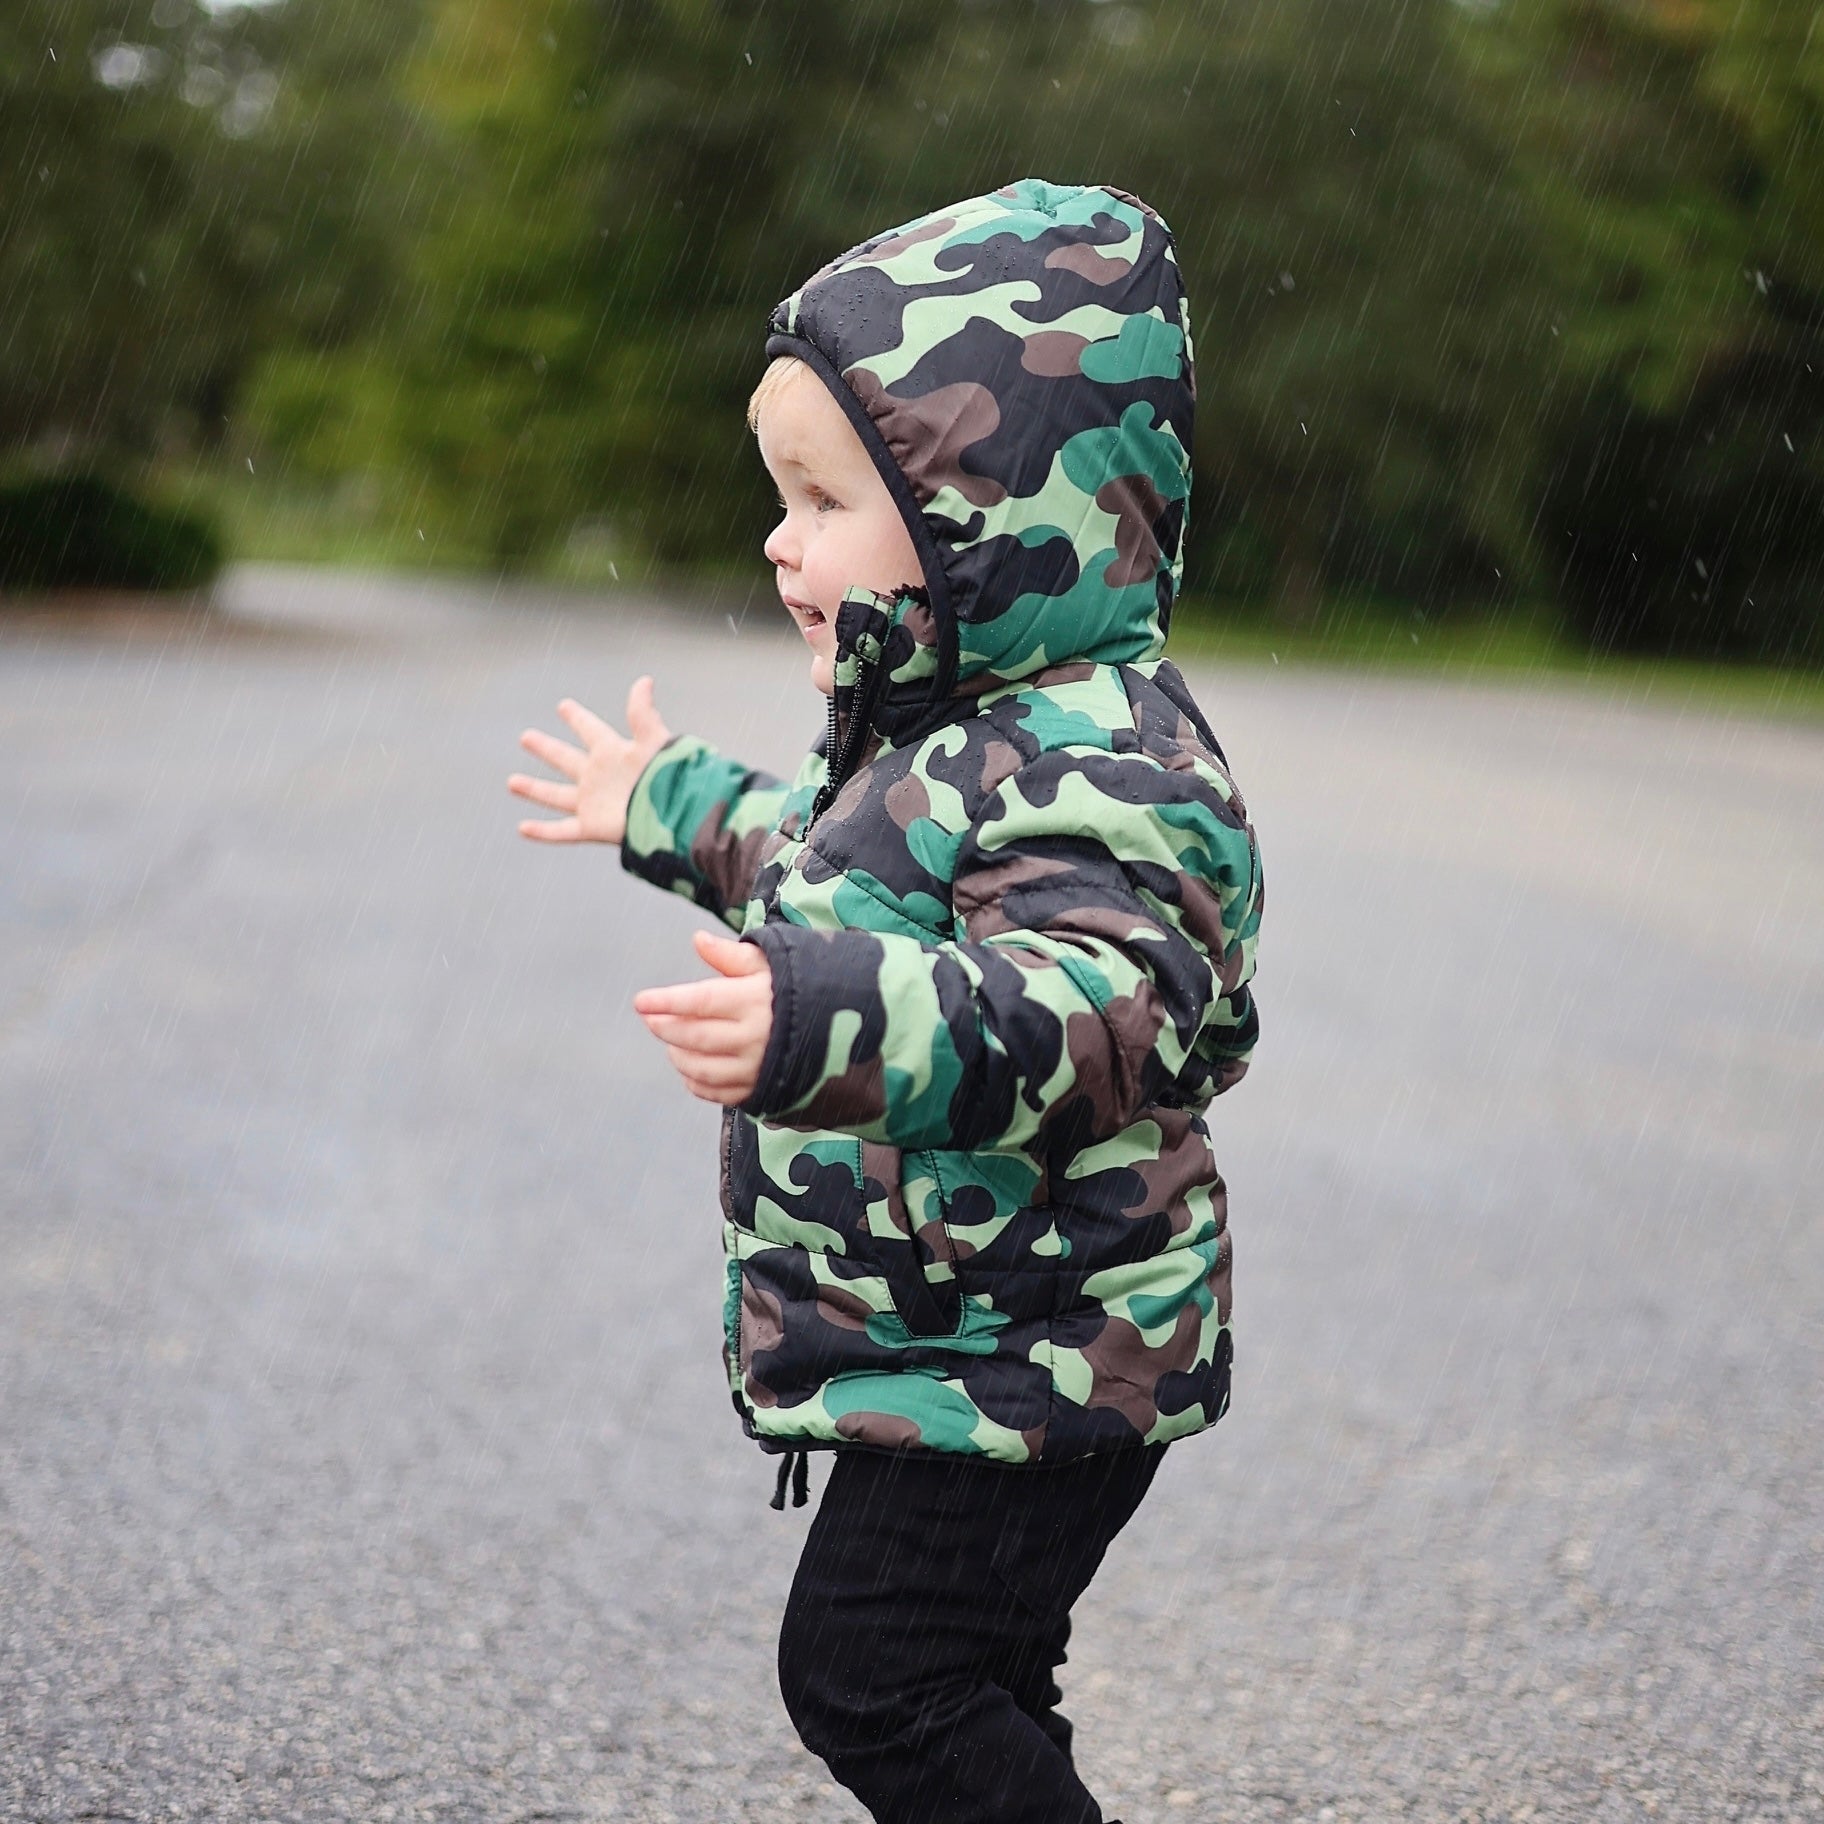 Green Camo Quilted Jacket - George Hats